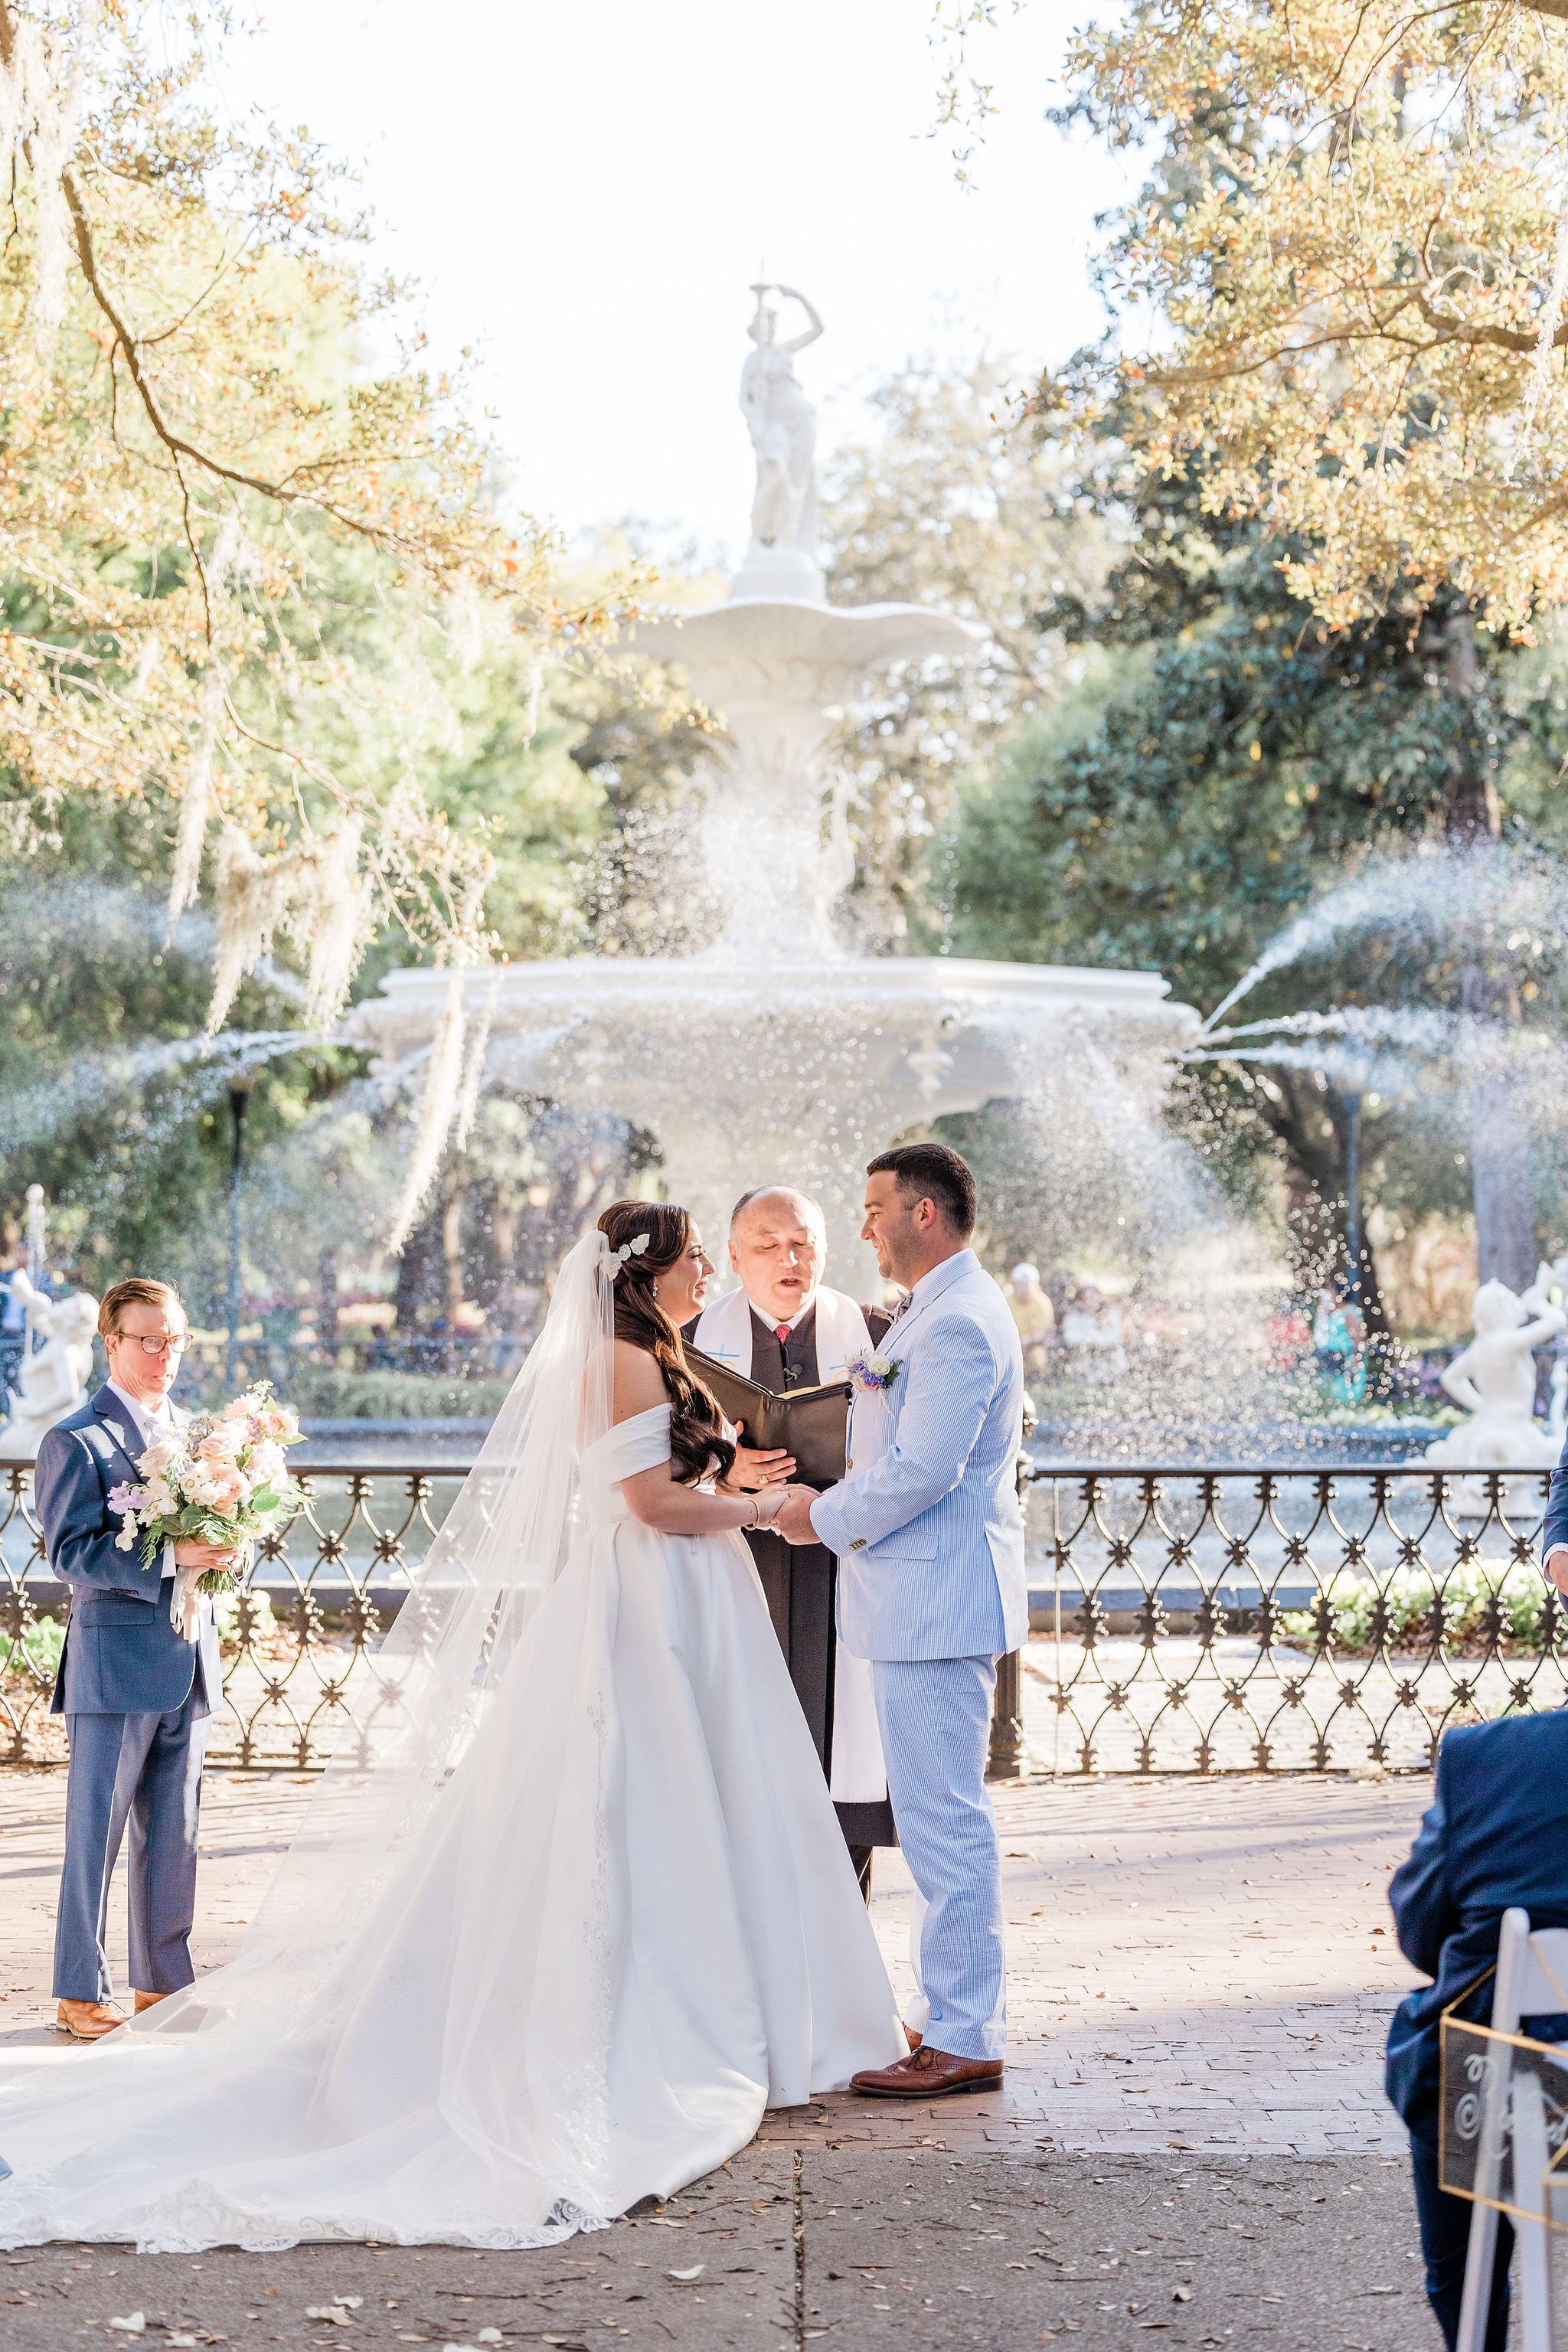 Victoria-and-stuarts-pastel-spring-wedding-at-the-forsyth-park-fountain-and-the-mansion-on-forsyth-in-savannah-georgia-planned-by-savannah-wedding-planner-and-savannah-wedding-florist-ivory-and-beau-12.JPG